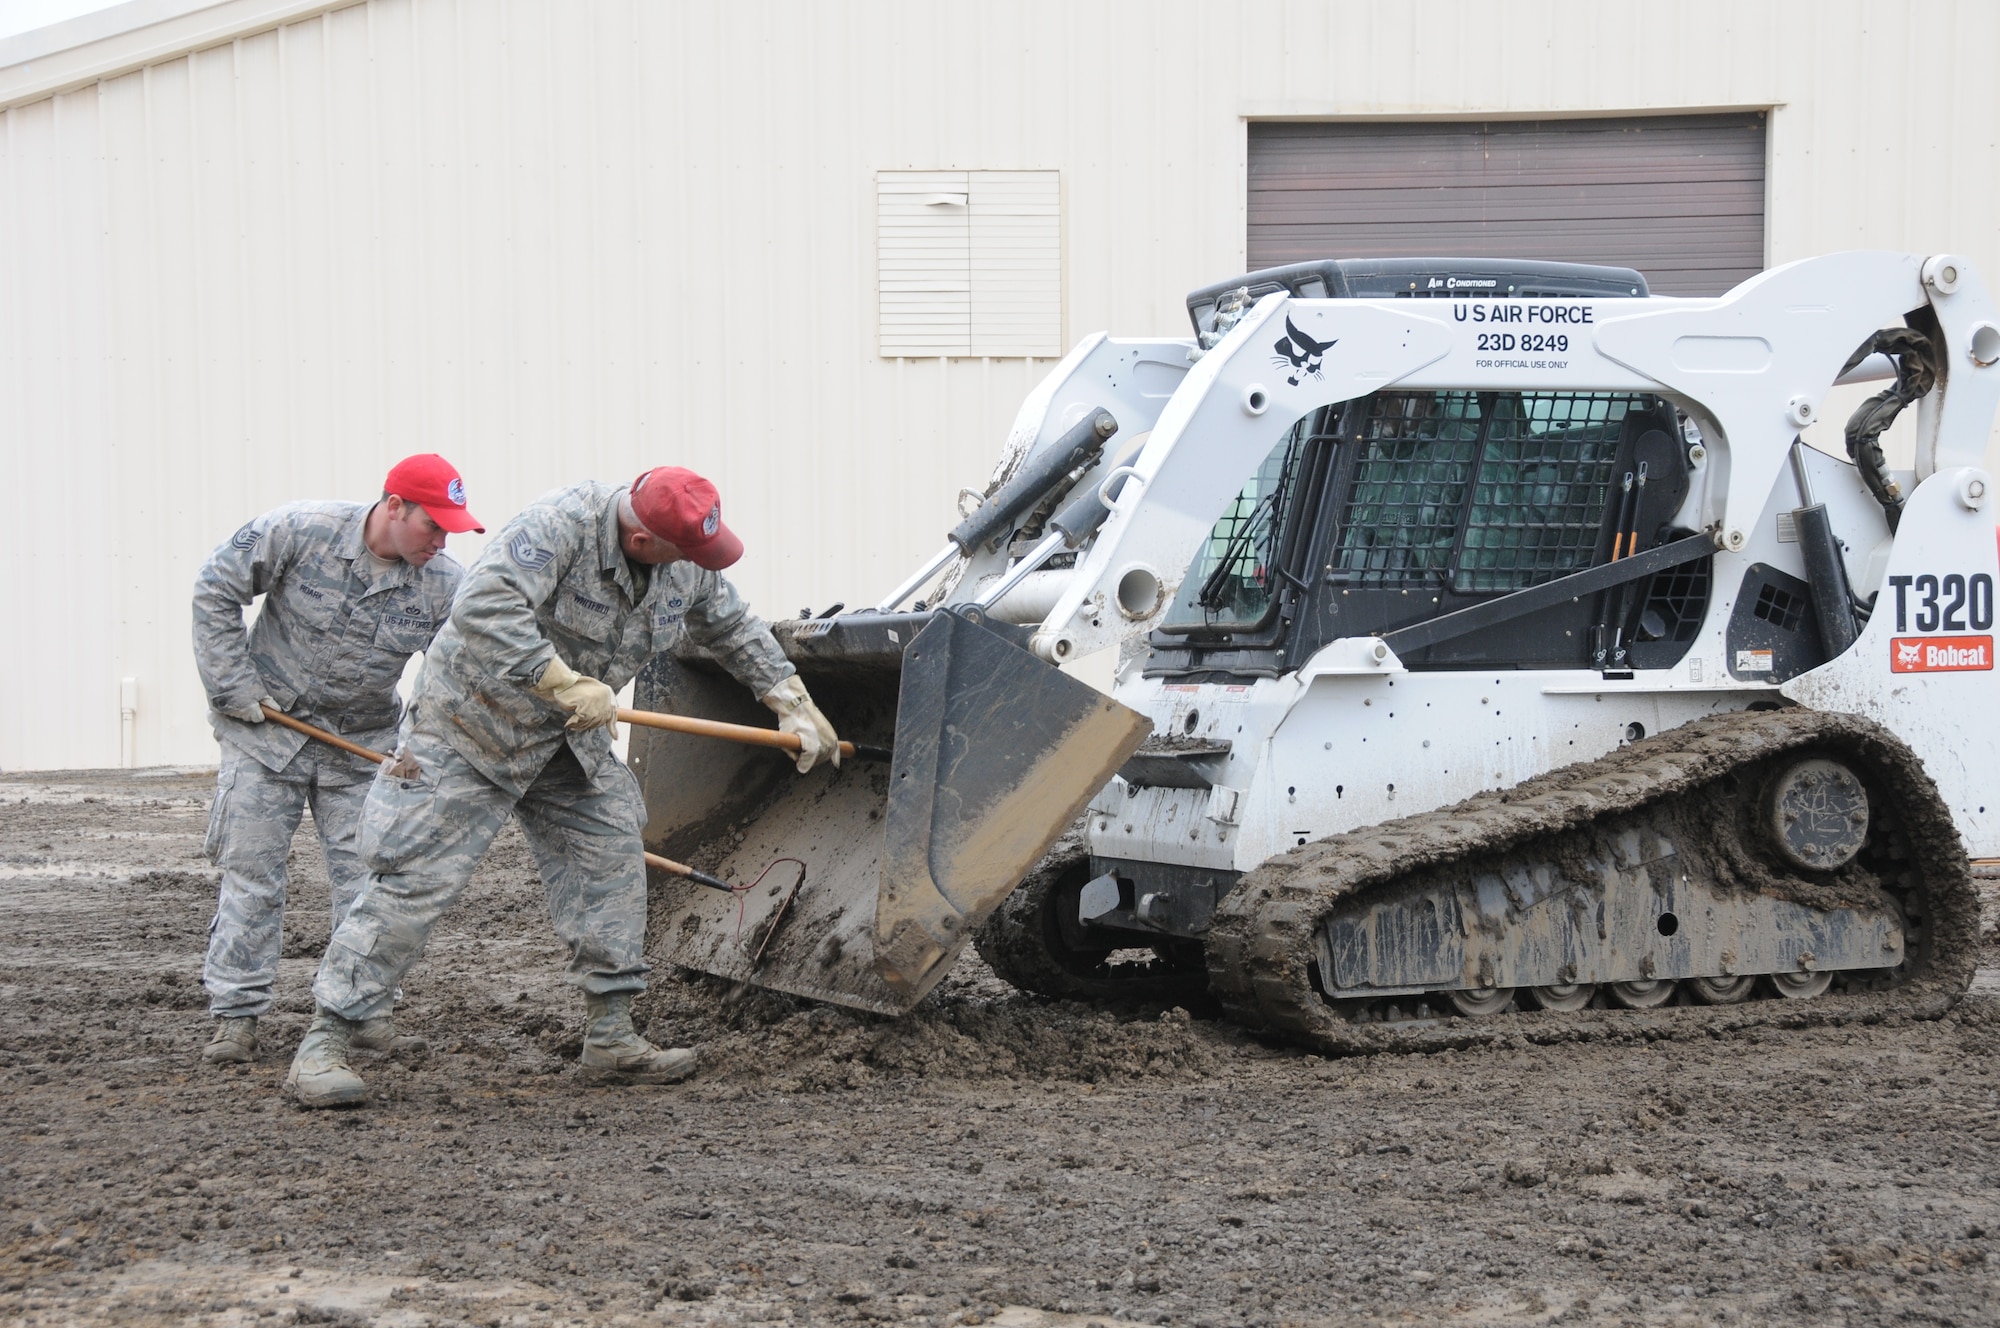 Members of the 567th Rapid Engineers Deployable Heavy Operations Repair Squadron Engineers (RED HORSE) Squadron (RHS) replace a gravel parking area with a concrete parking lot at Ebbing Air National Guard Base, Fort Smith, Ark., Nov. 5, 2014. The 567th RHS ventured to Ebbing Air National Guard Base to retrain on its RED HORSE capabilities with the 188th Civil Engineering Squadron. The 567th is an Air Force Reserve unit based at Seymour Johnson Air Force Base, N.C. (U.S. Air National Guard photo by Airman 1st Class Cody Martin/Released)